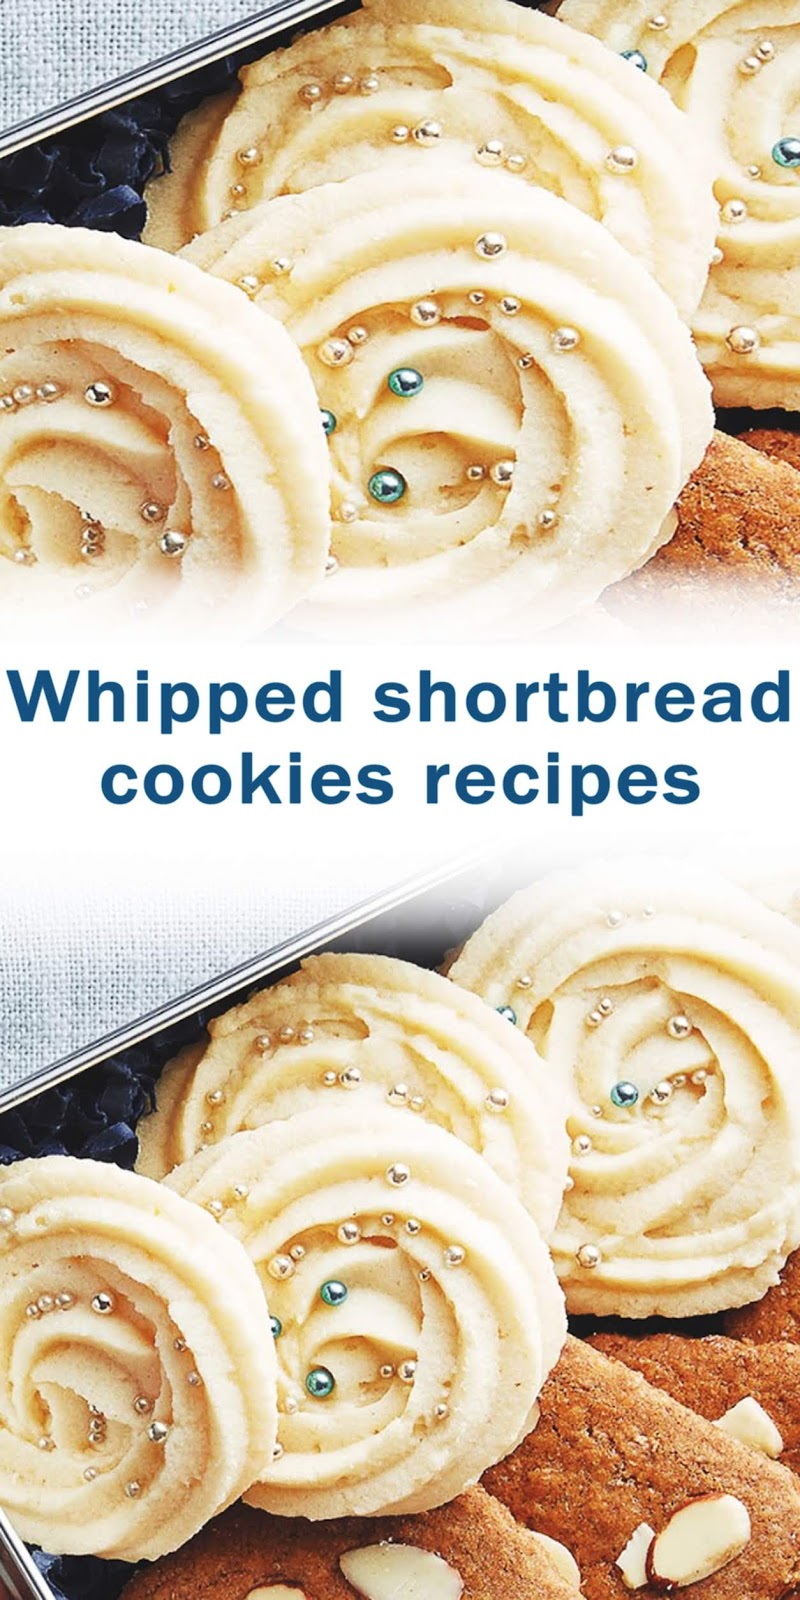 Whipped shortbread cookies recipes